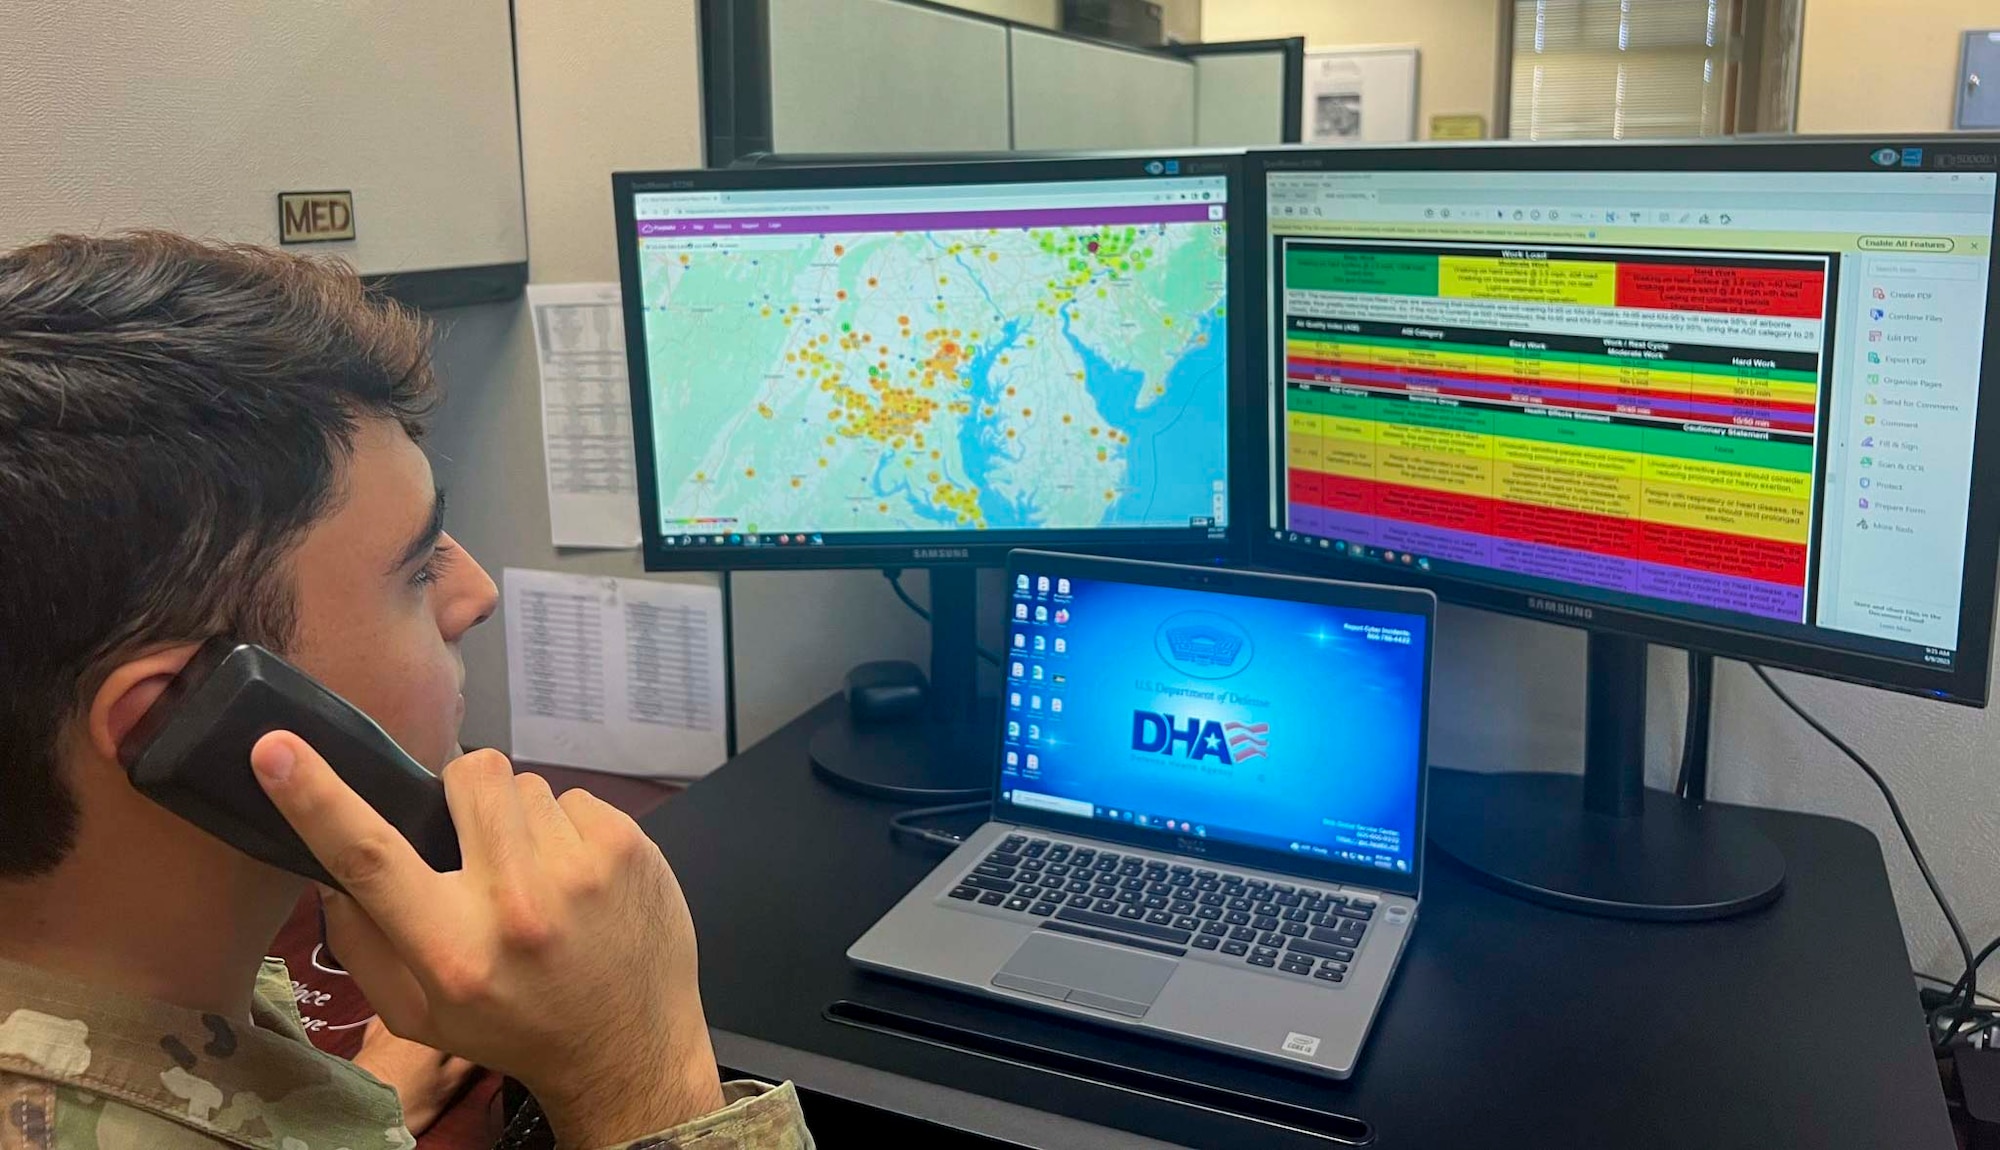 The Beale bio team supported several bases, including Joint Base Andrews, during the East Coast air quality crises bought on by the Canadian wildfires, utilizing the AQI chart and associated health risks from the respective base